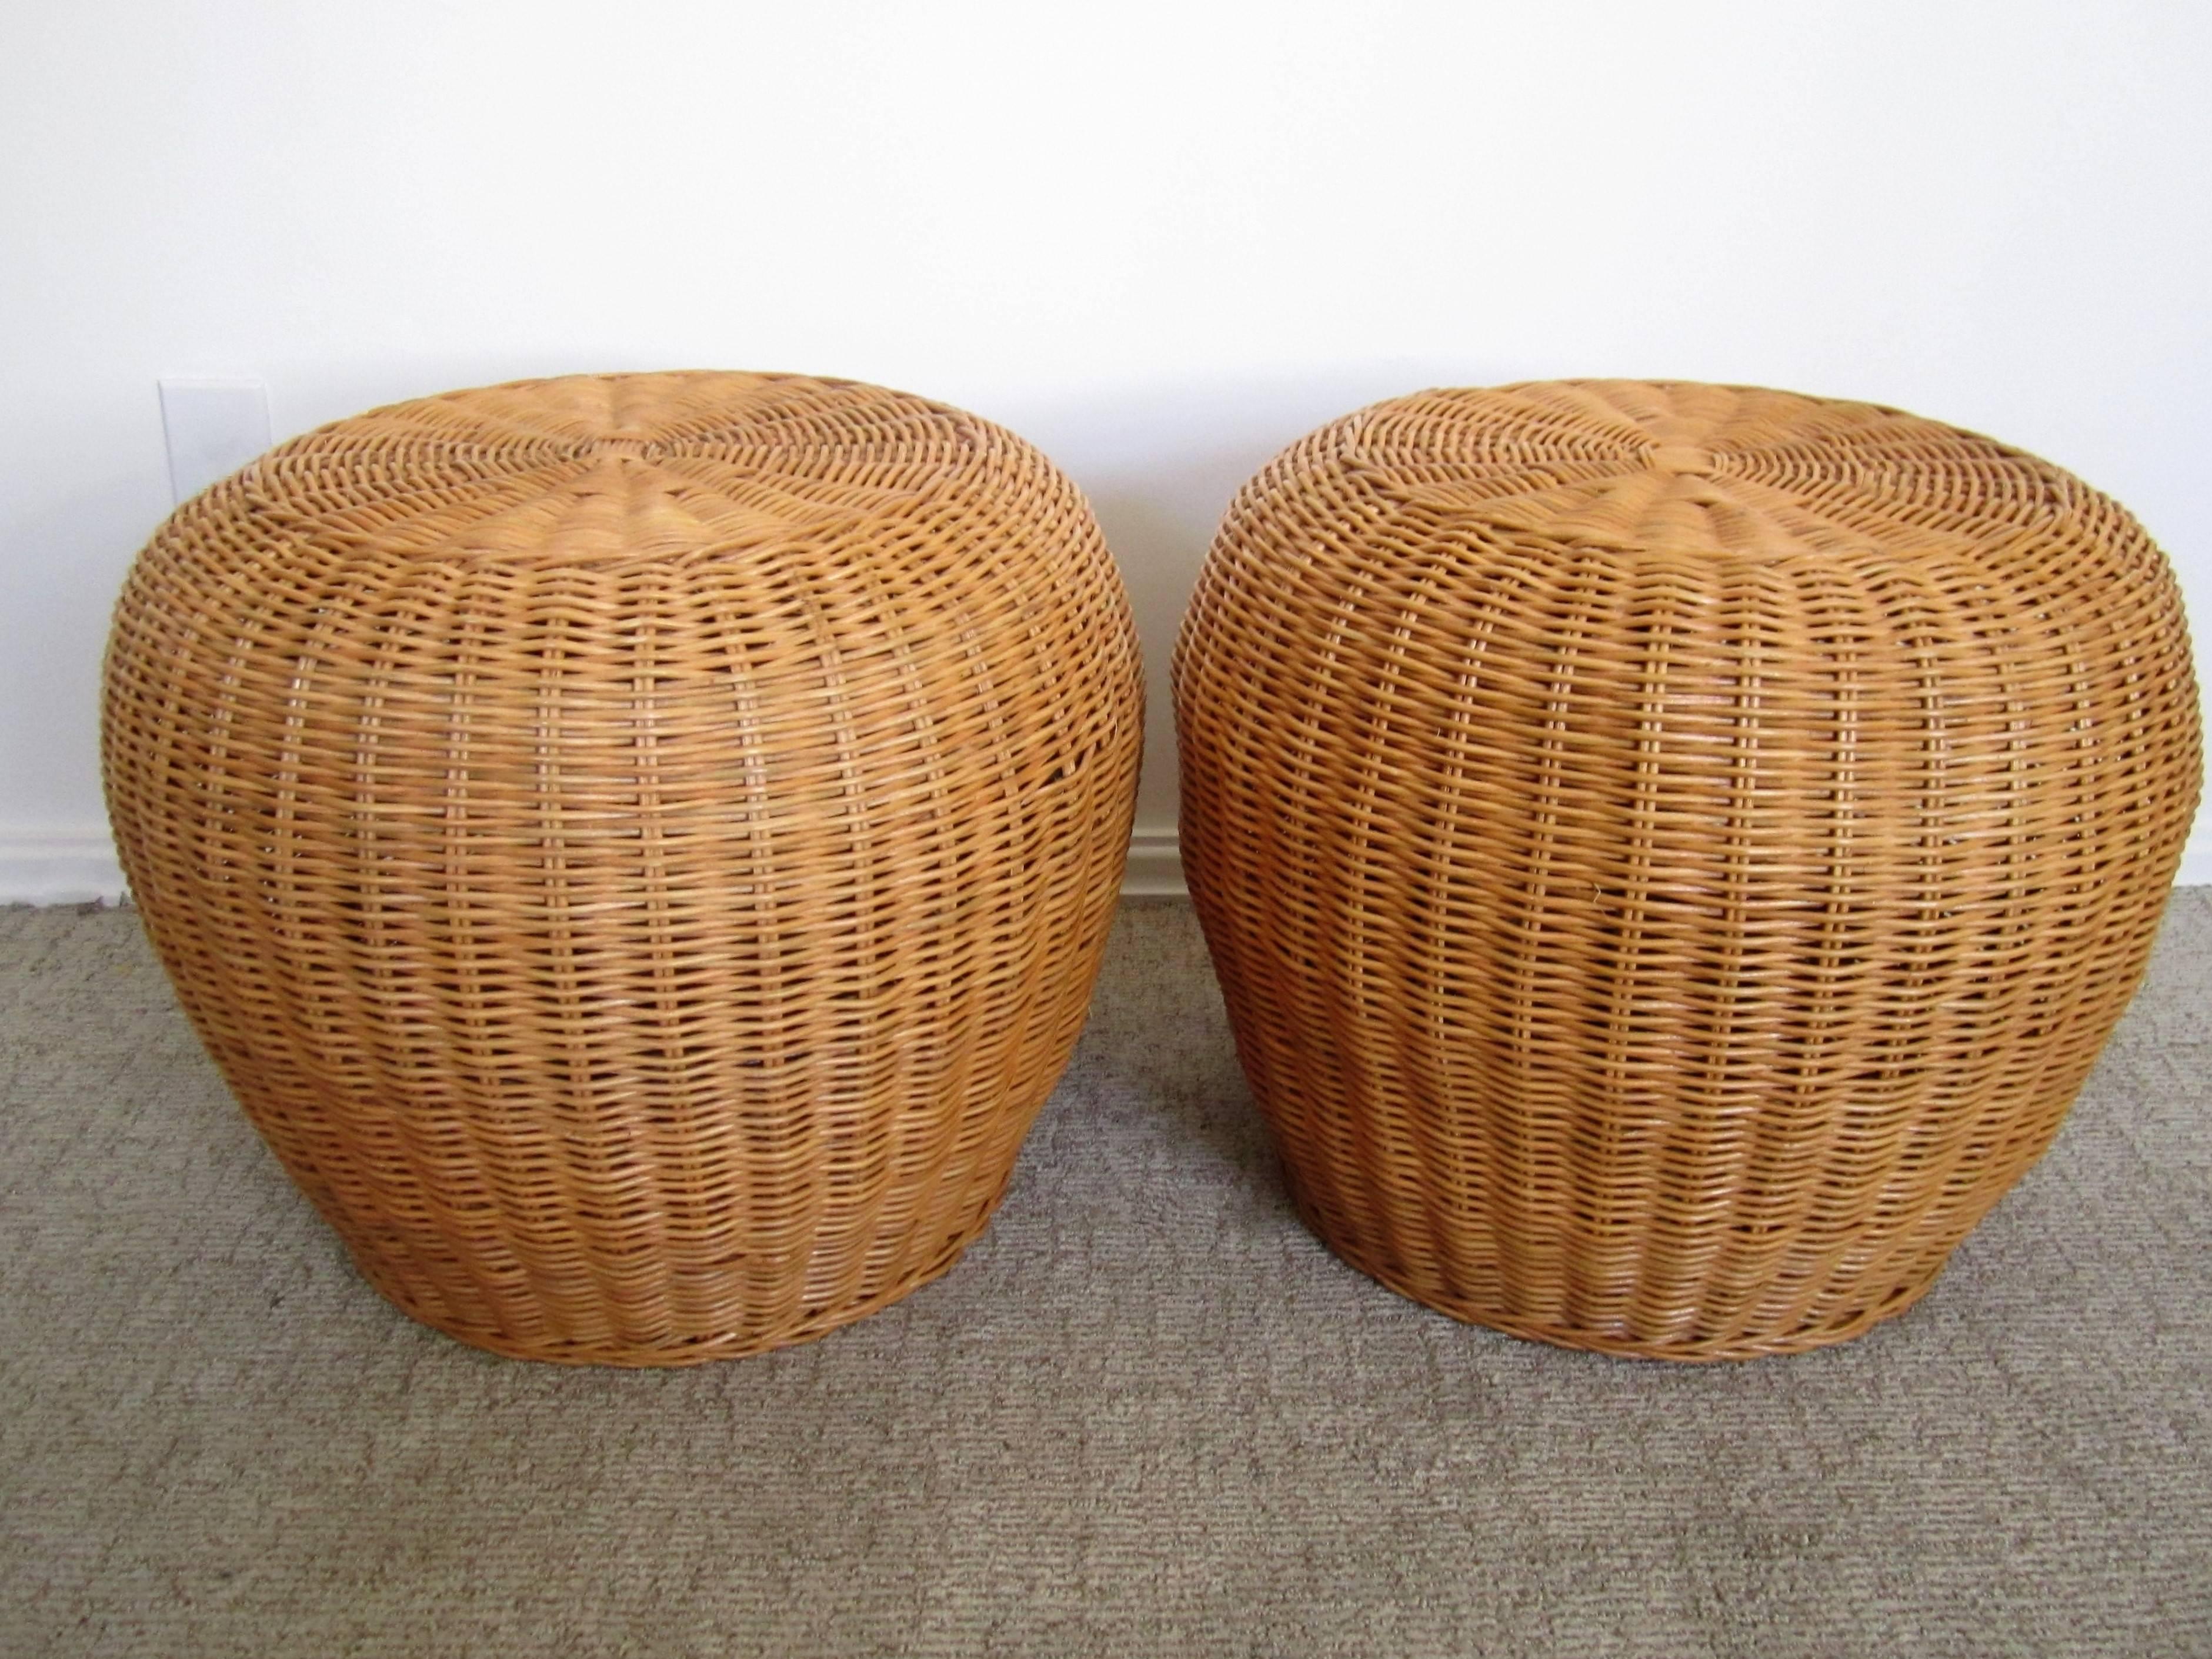 A pair of vintage European wicker round ottomans, benches, or stools. Can be used as seating or as side tables or cocktails tables. Versatile. Circa 1970s. Pair available here online, and by request, can be made available by appointment to the Trade